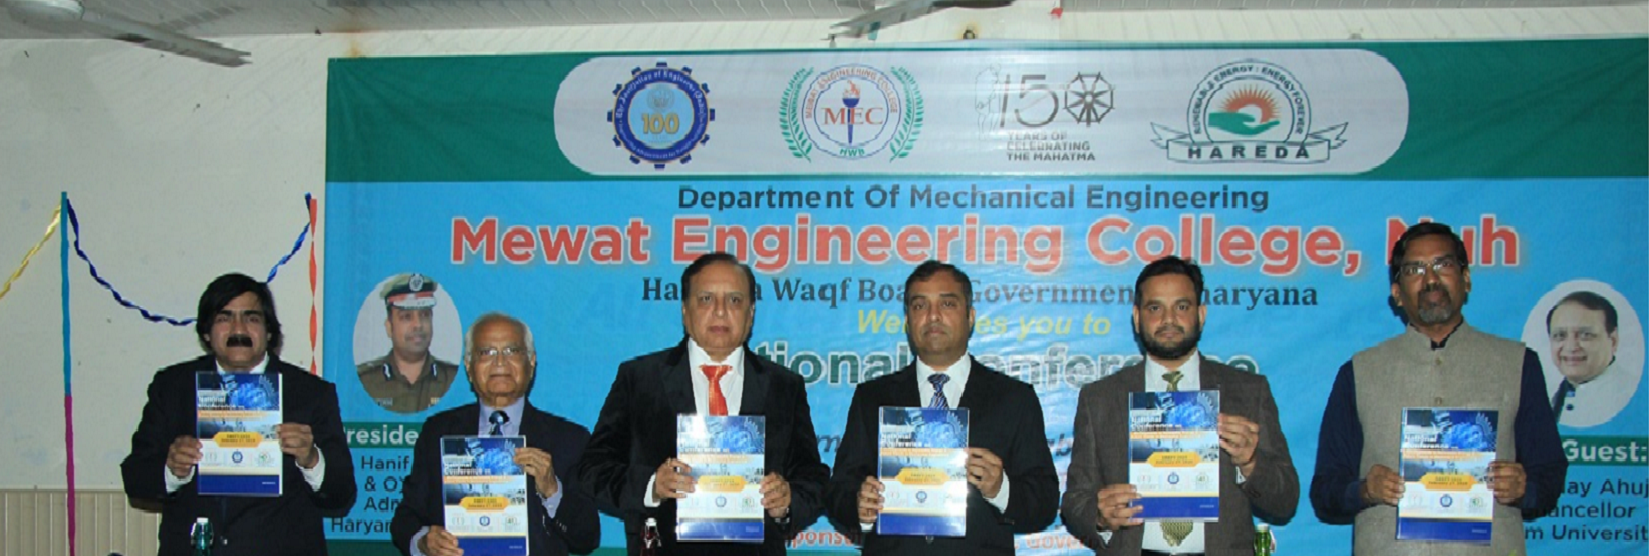 Mewat Engineering college Office photo Banner